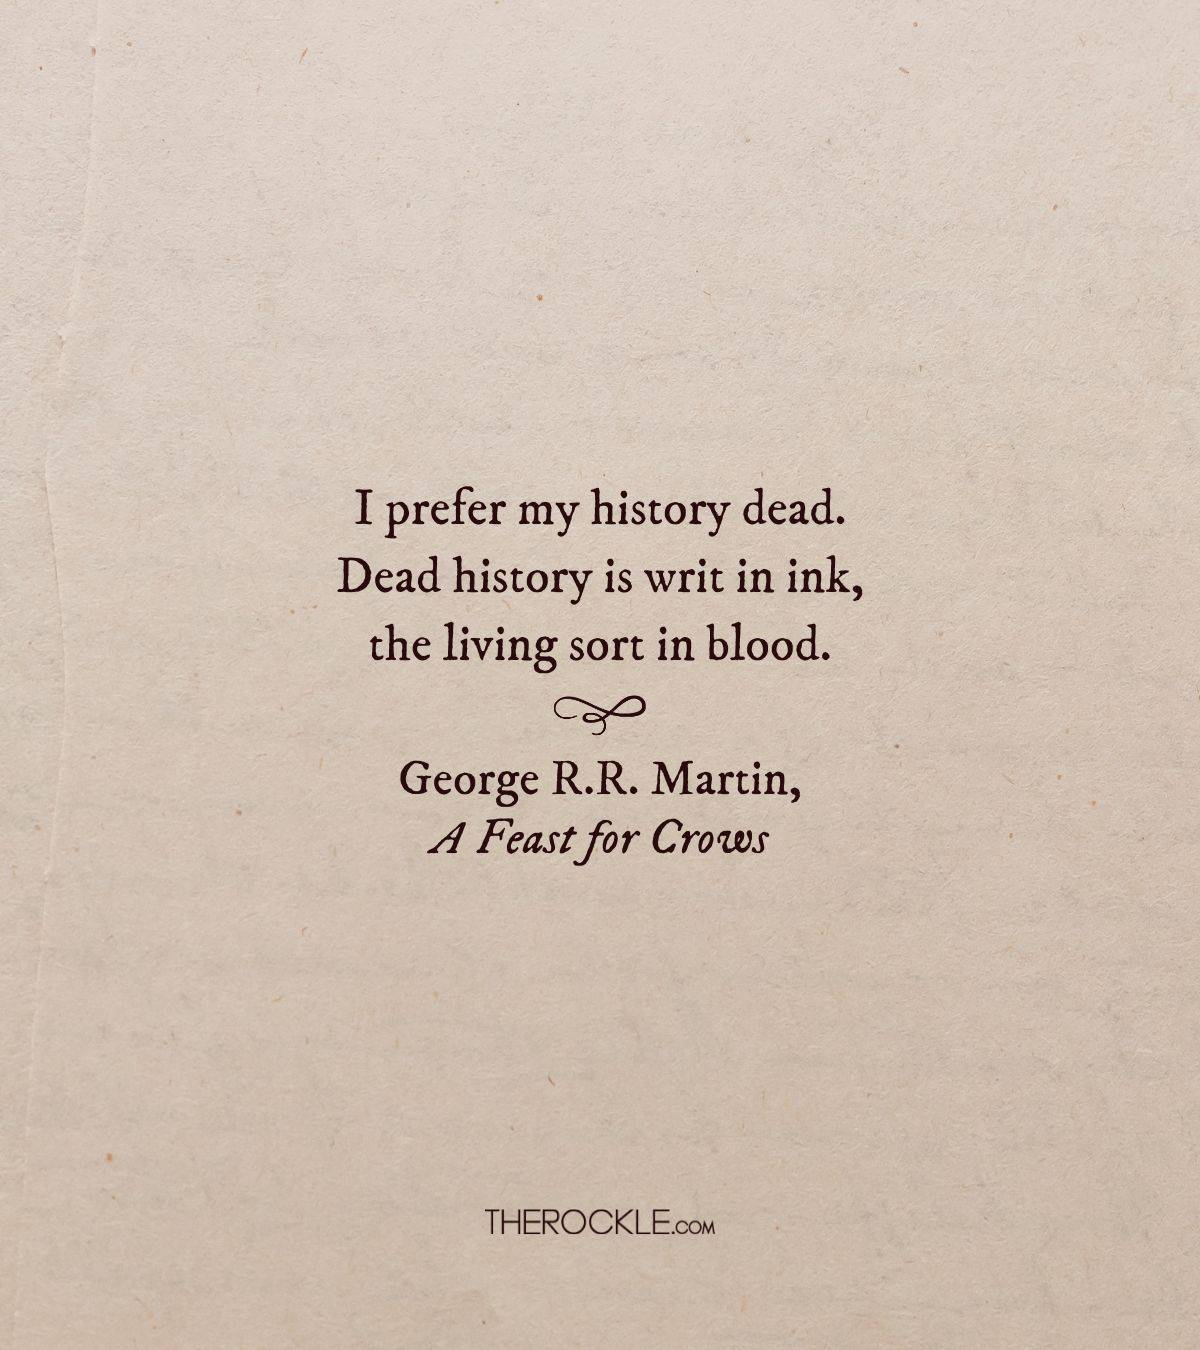 George R.R. Martin quote about history